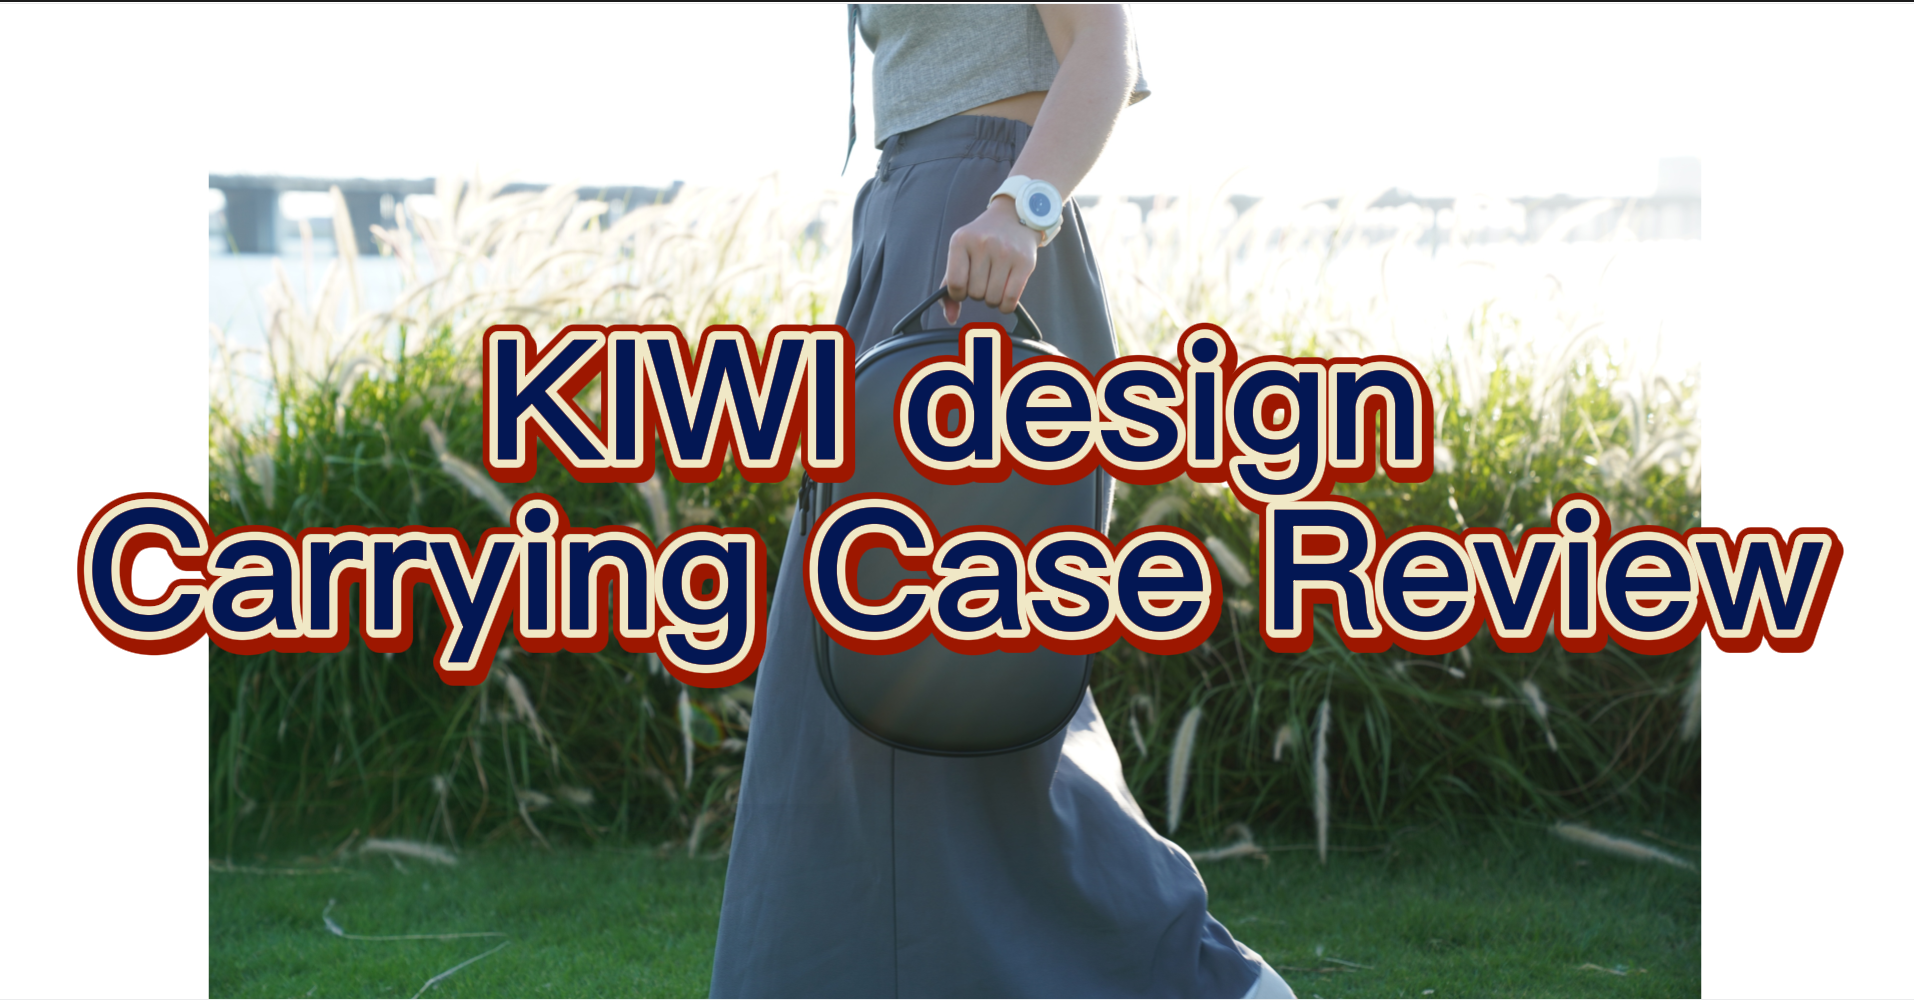 Carrying Case Review - How Does KIWI Design Improve Your VR Experience